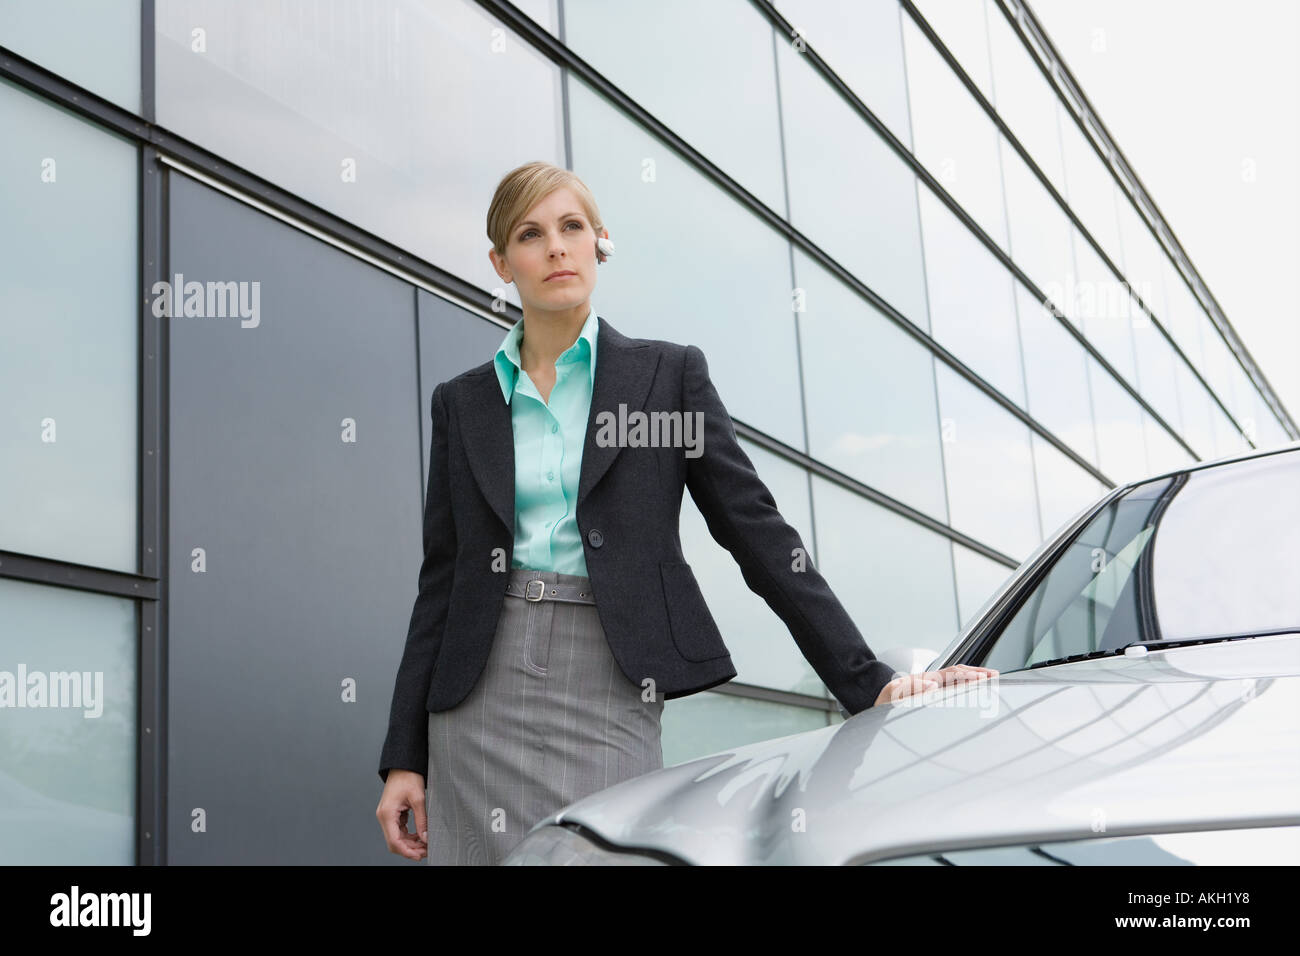 Businesswoman standing by car Stock Photo